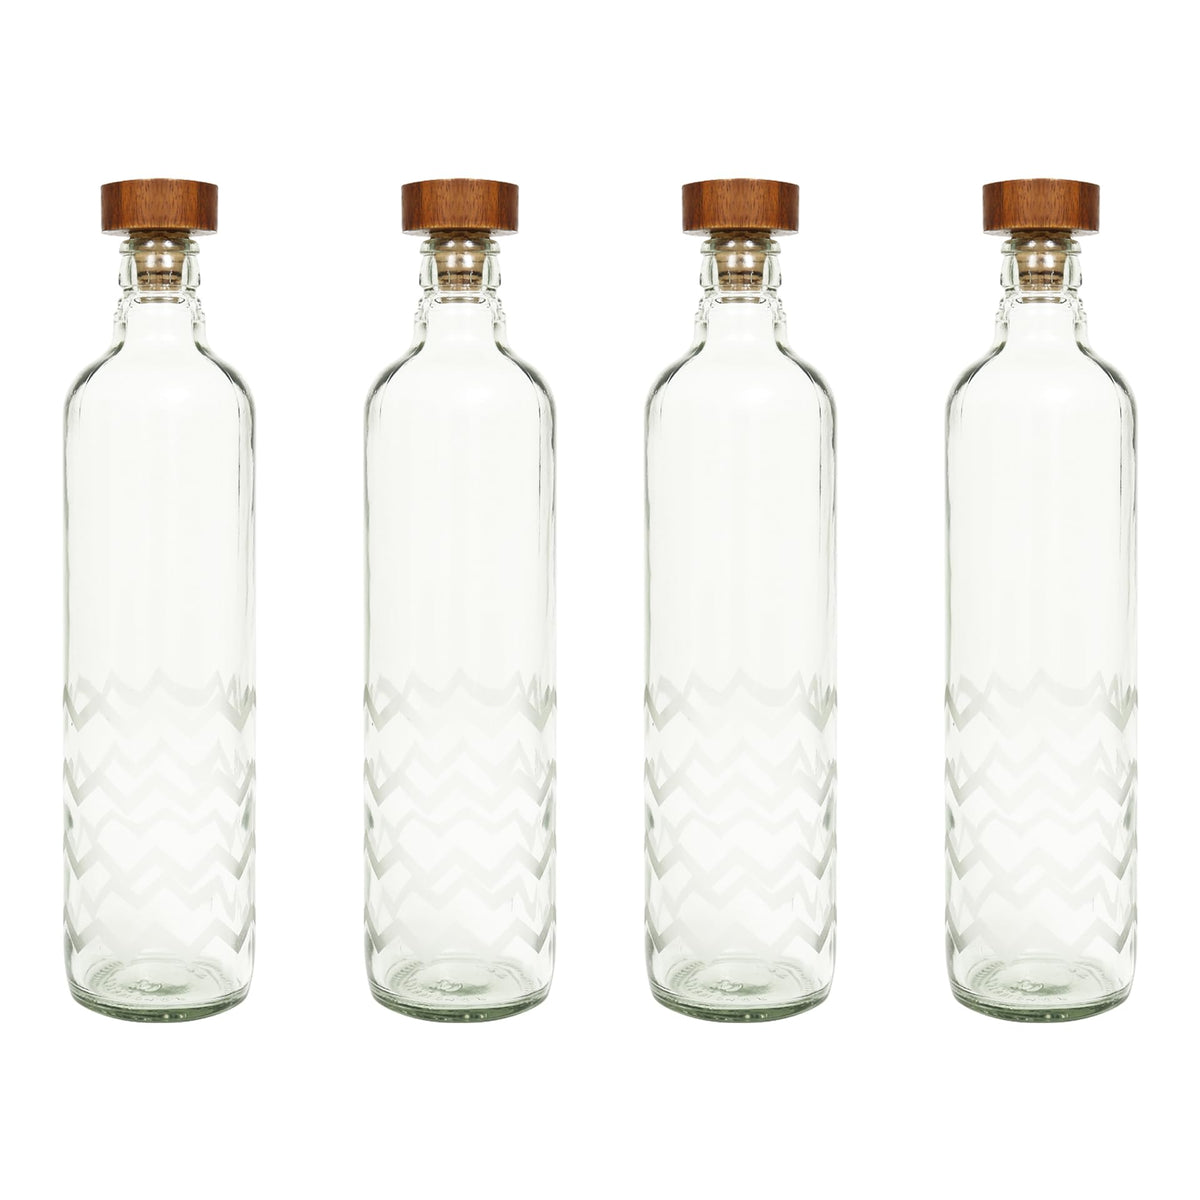 Ellementry frosted chevron glass bottle with brown wood stopper| 750 ml | Clear | Water Bottle | Milk Bottle | Juice Bottle | Cocktail Bottle | Handcrafted | Sustainable | Food Safe | Fusion | Set of 4